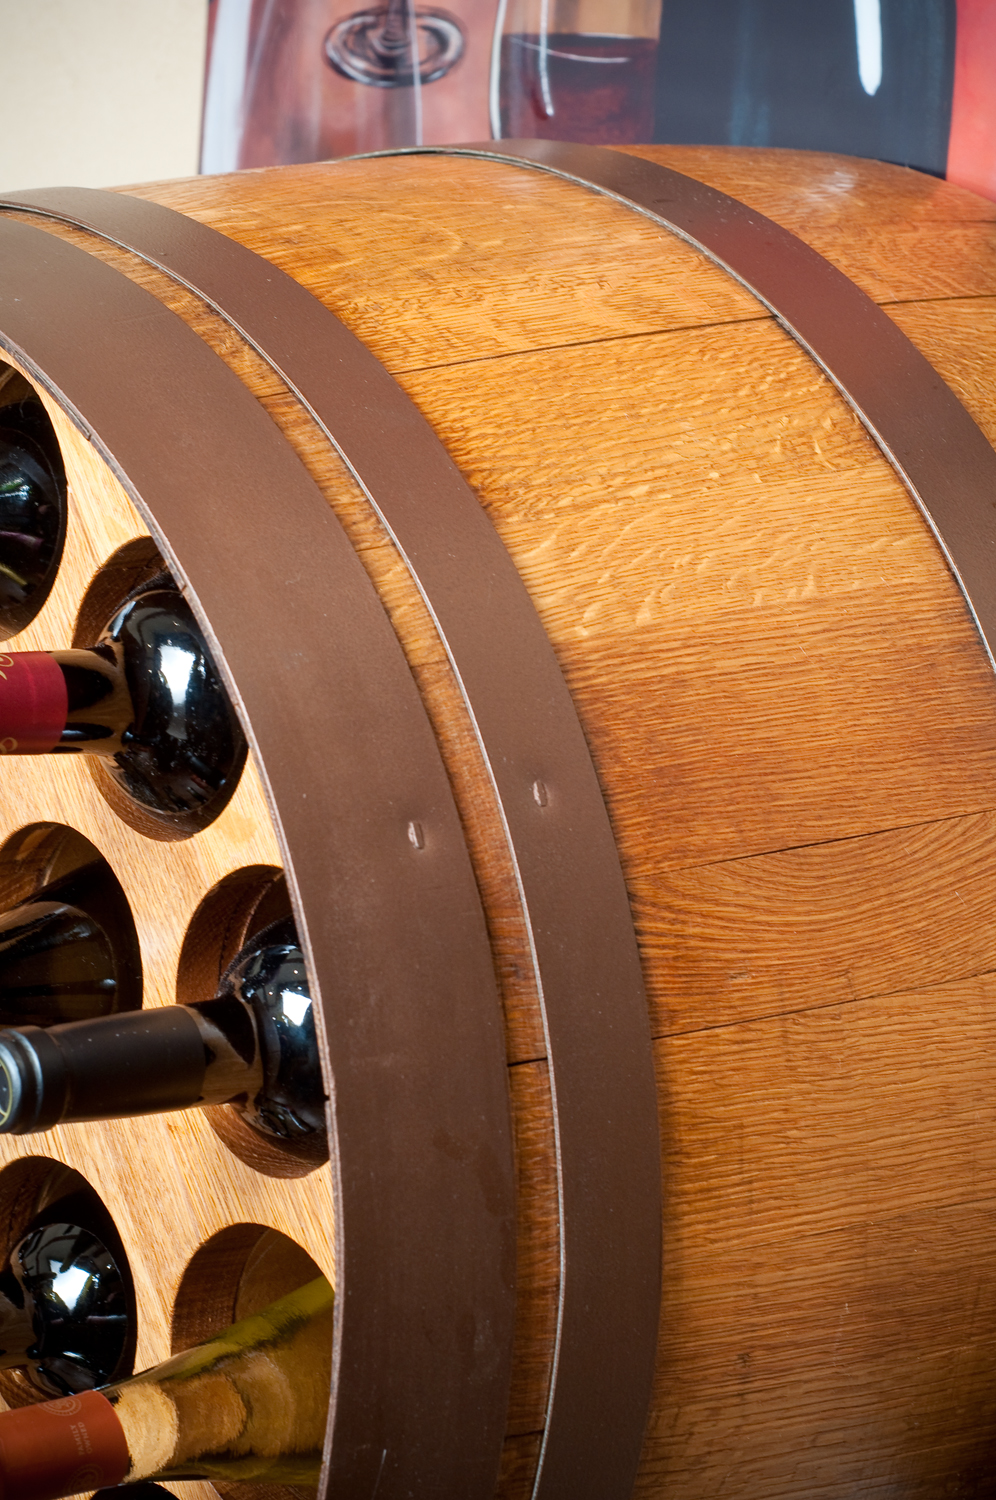 Adopt This Barrel: The Barrel Rack Offers new Life to old Wine Barrels